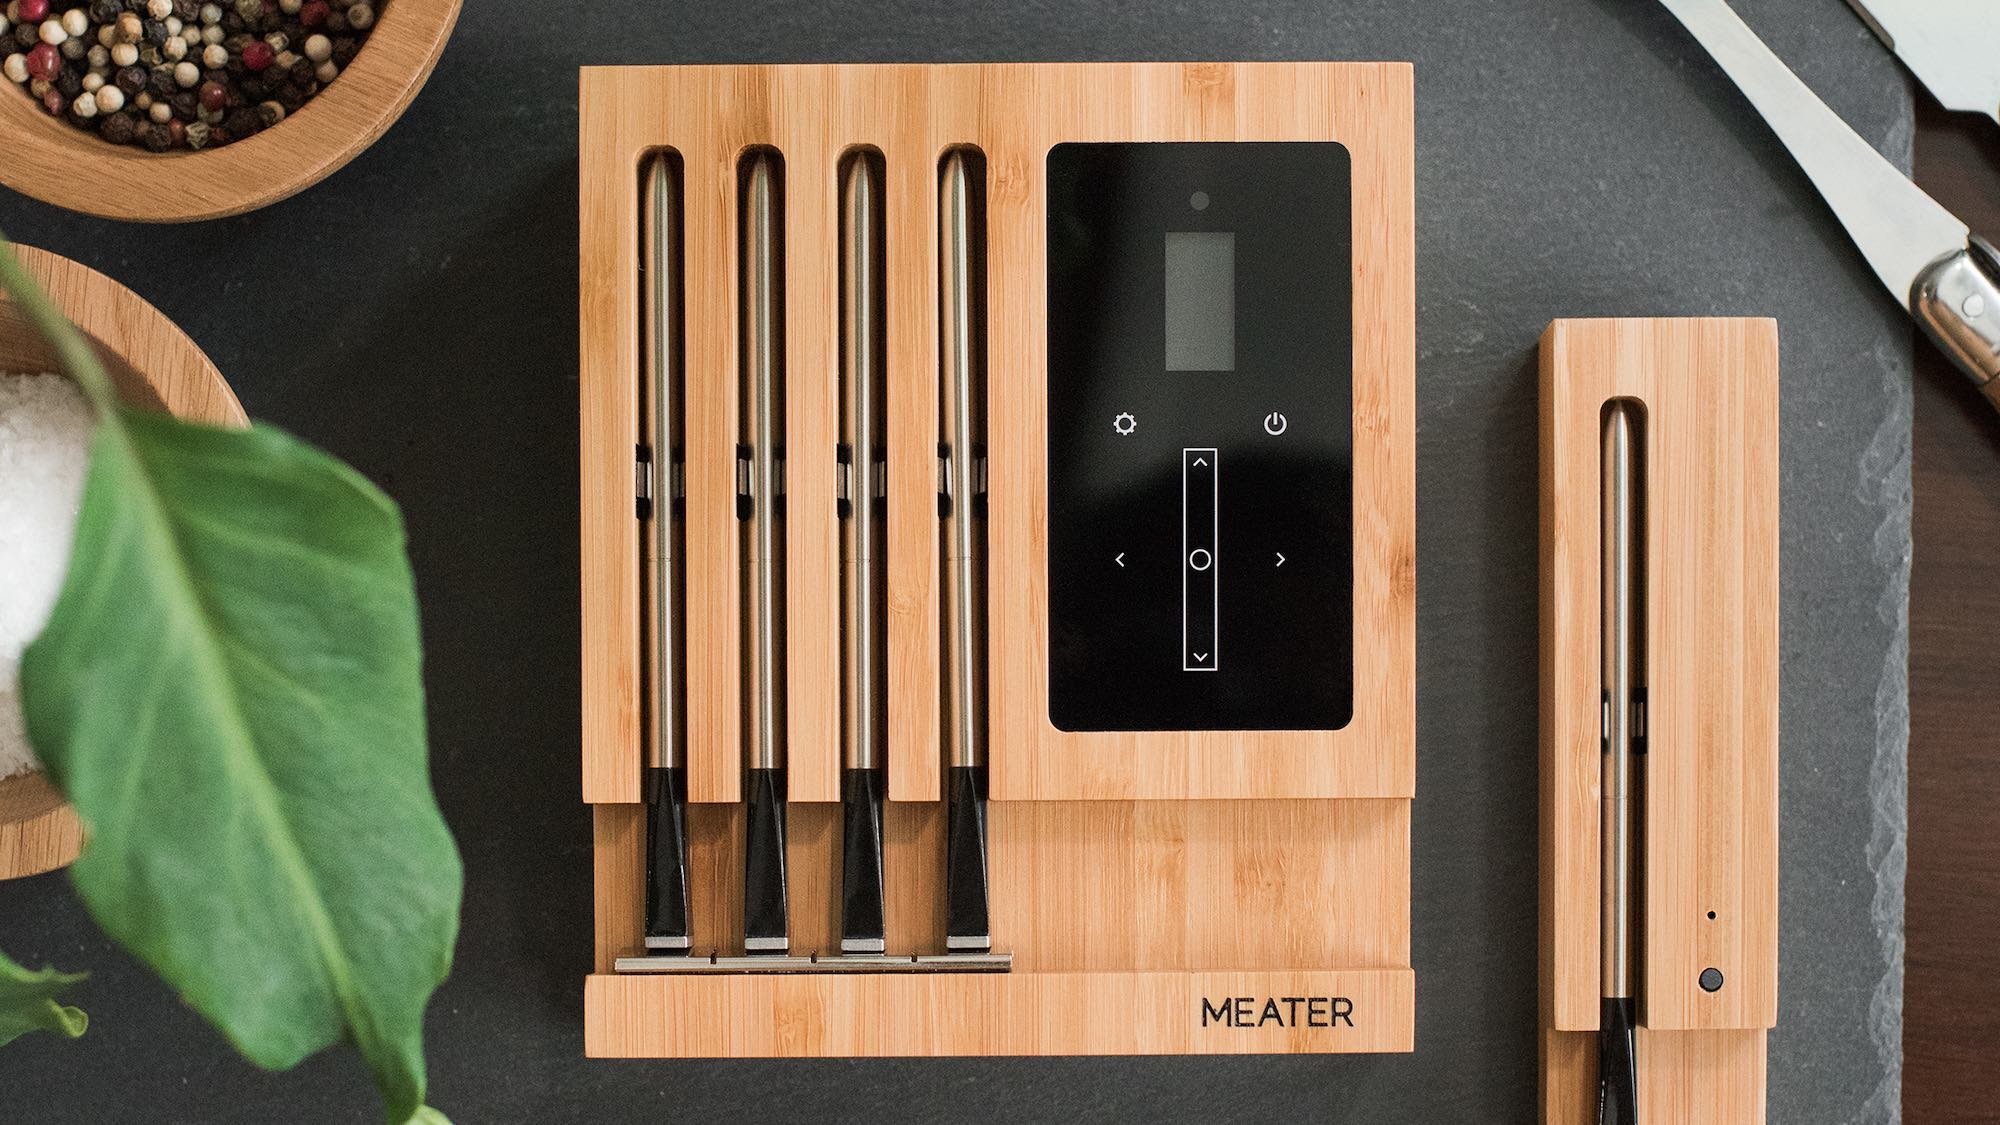 MEATER Block smart cooking probes allow you to accurately cook food to your liking